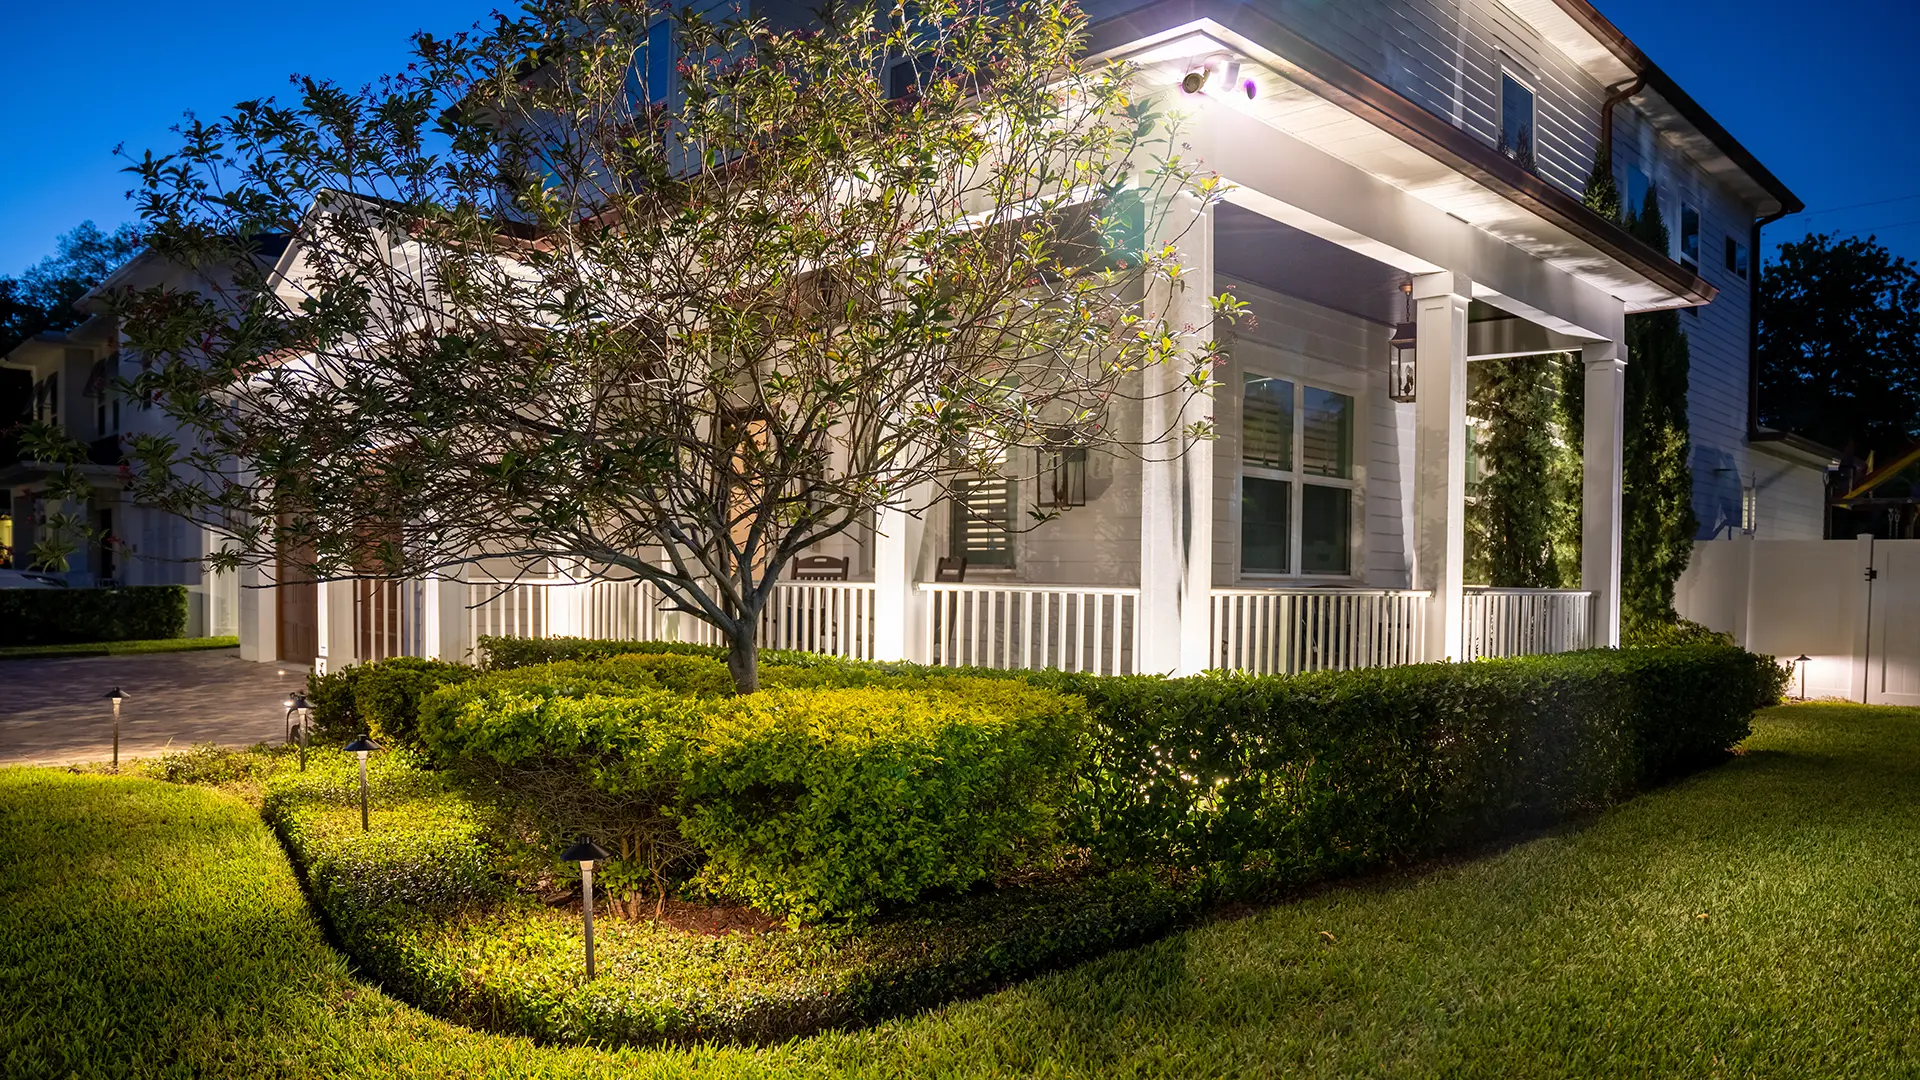 5 Helpful Landscape Lighting Tips to Add Curb Appeal